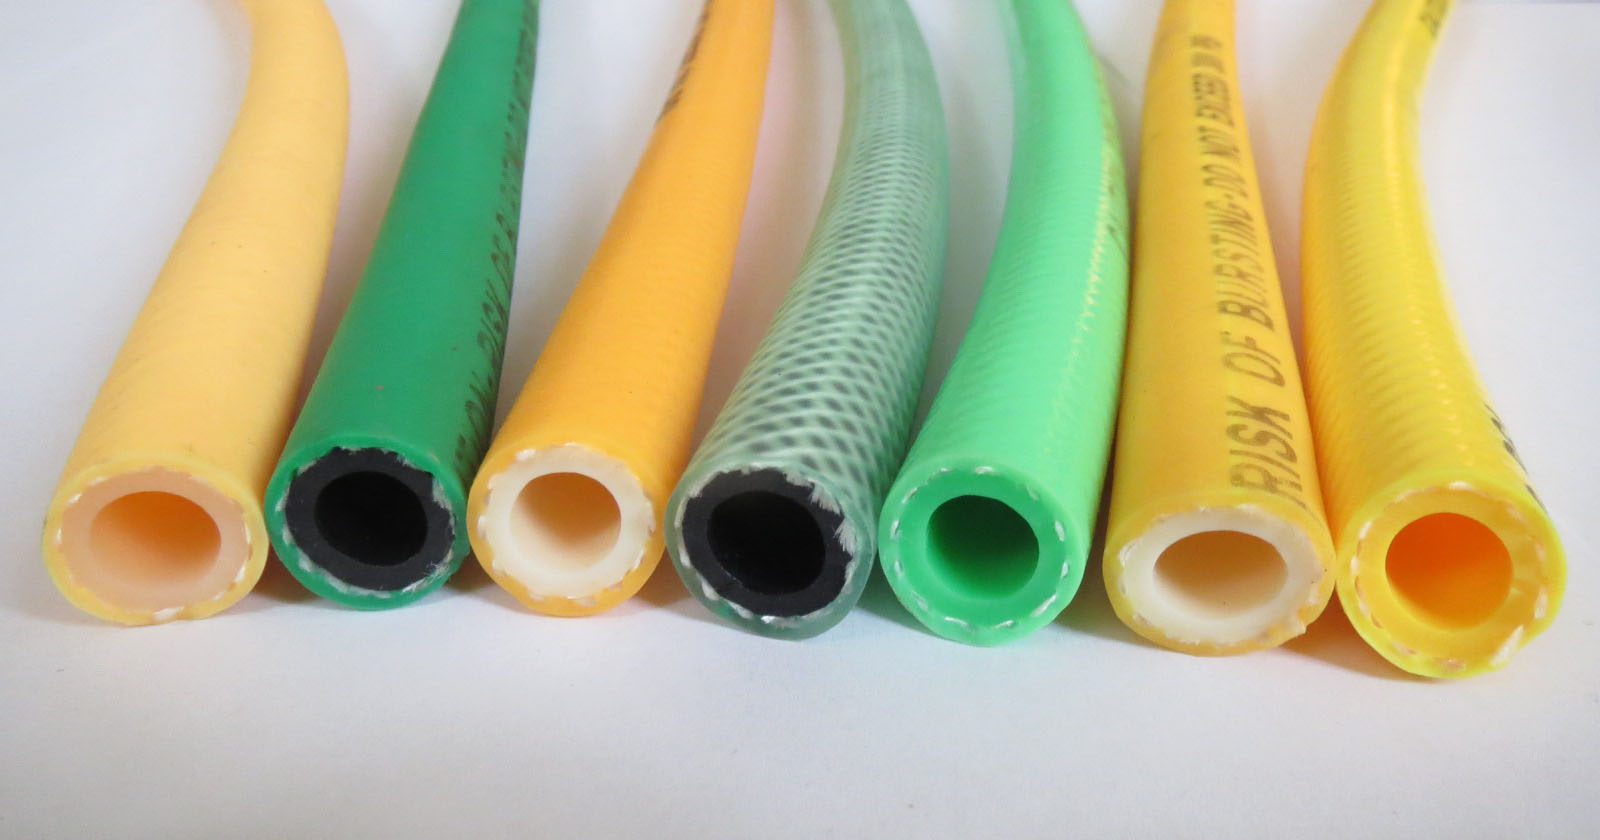 Characteristics of rubber and plastic insulated pipes